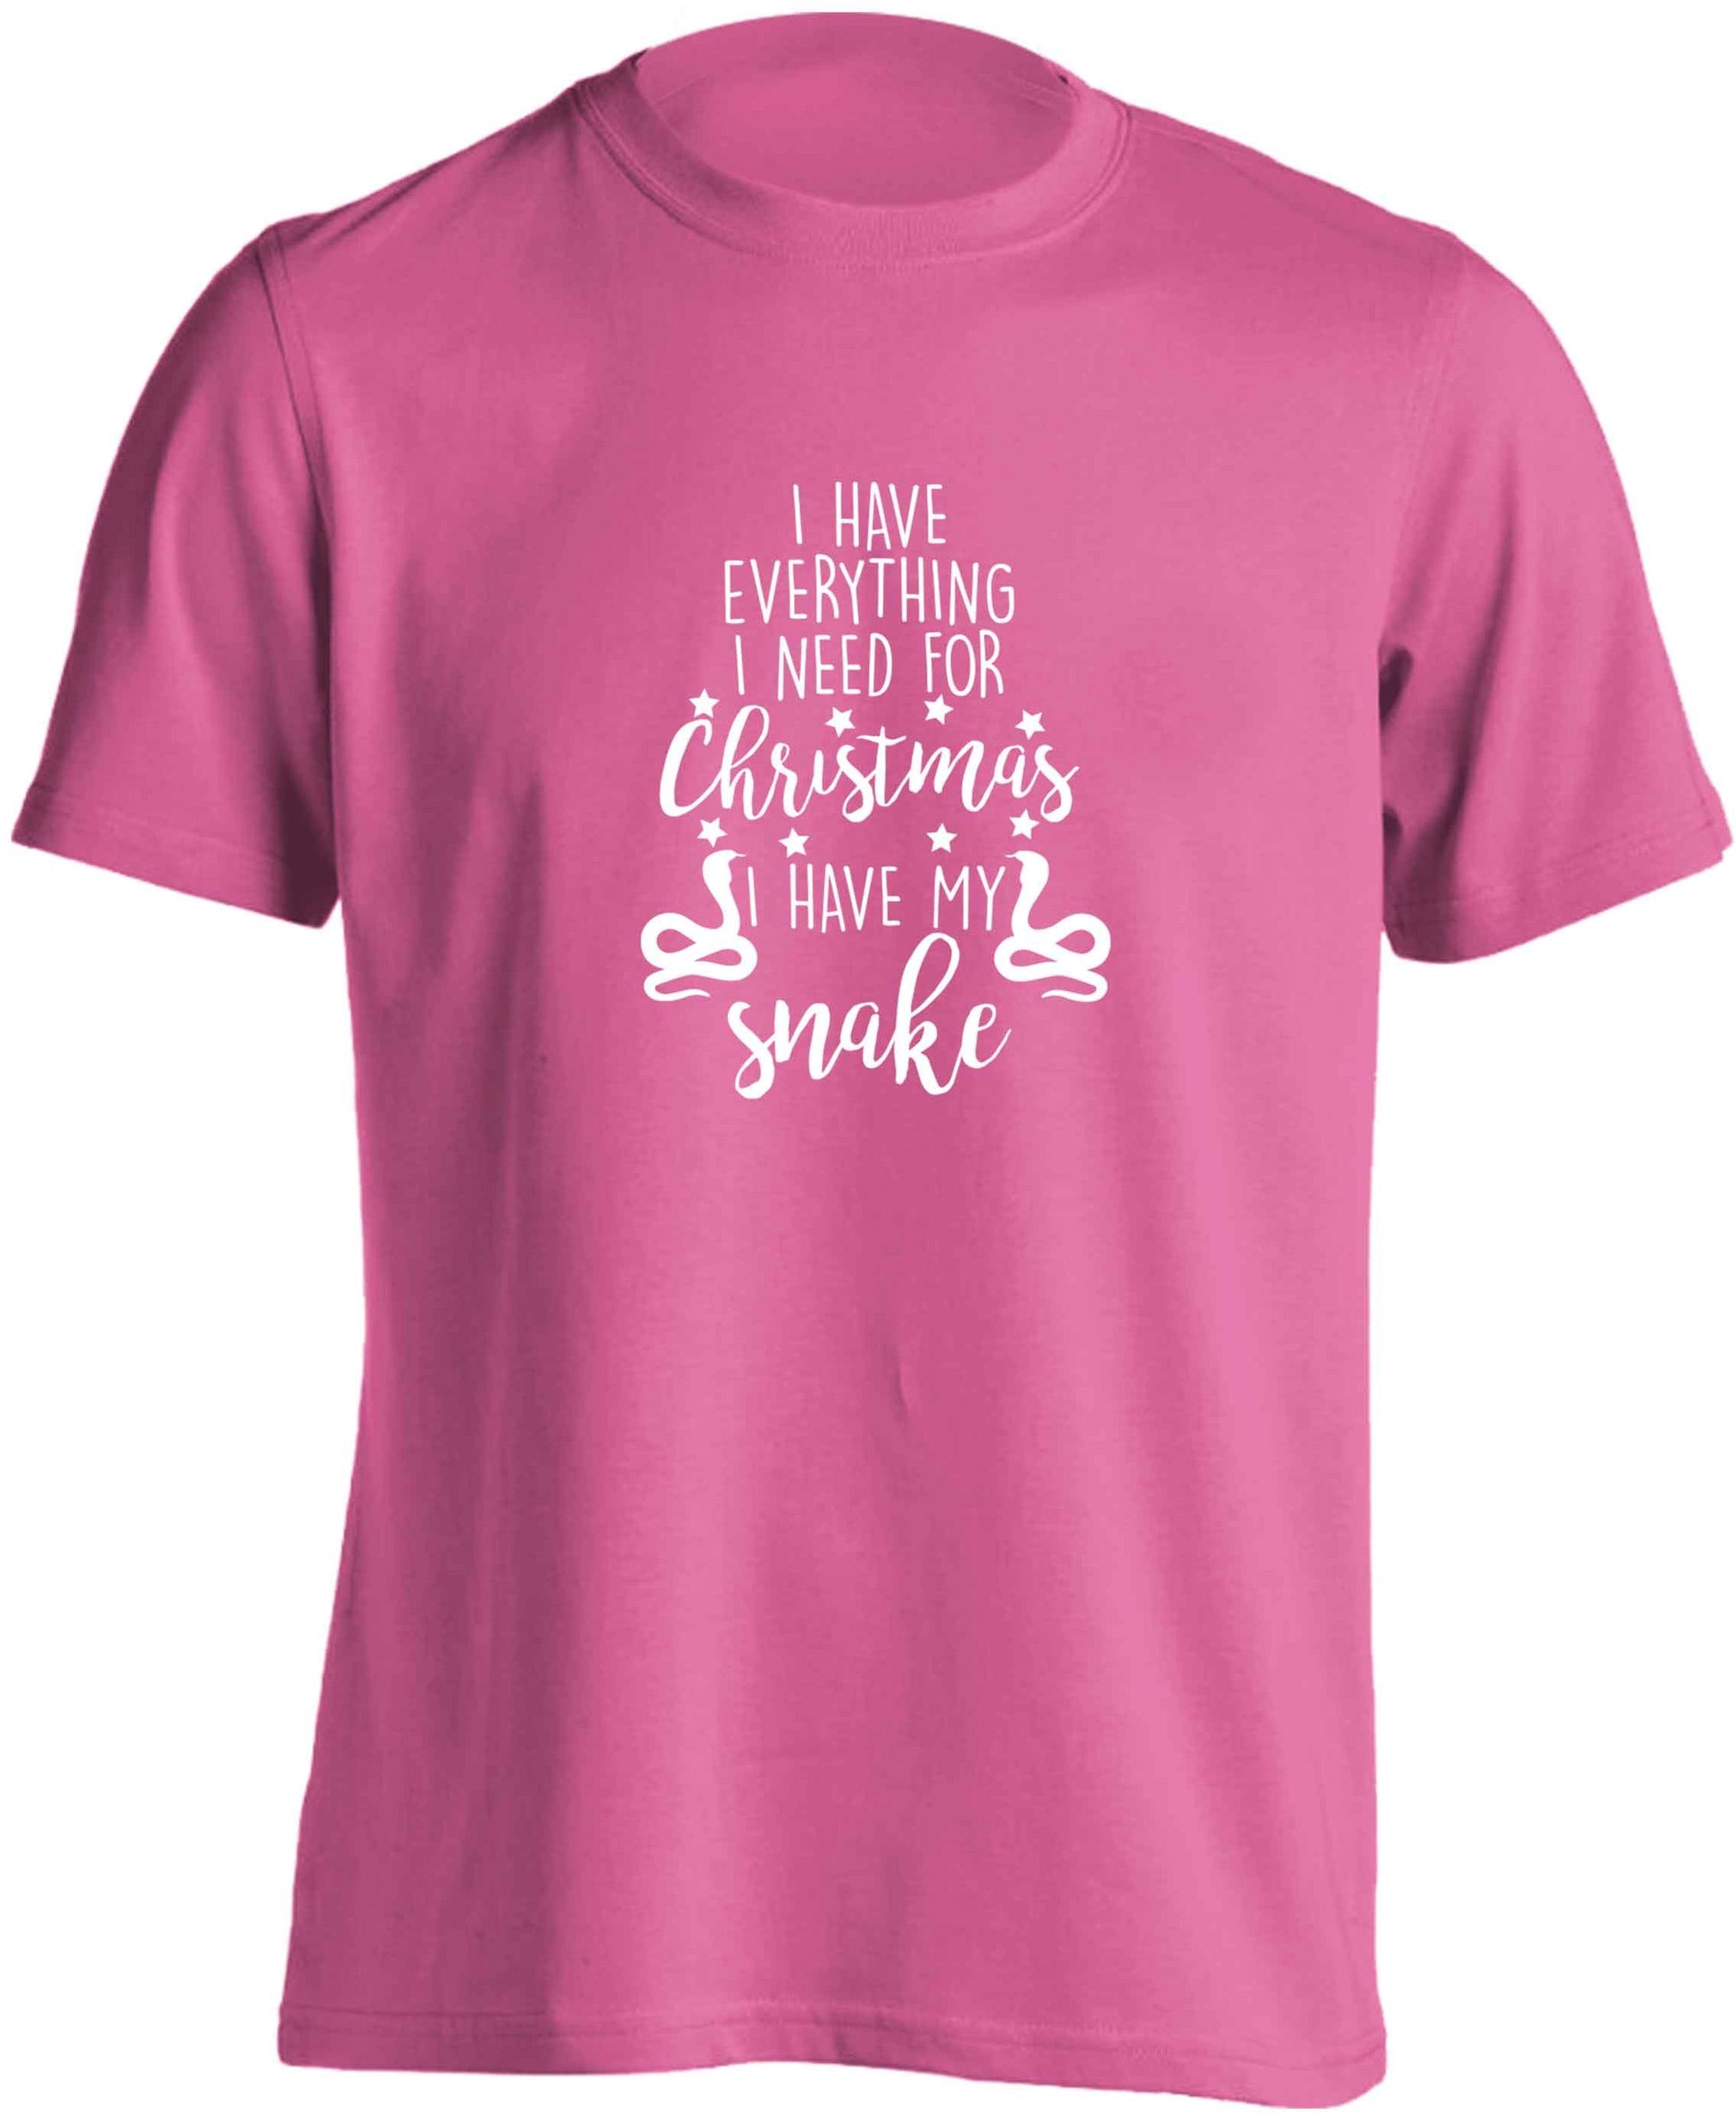 I have everything I need for Christmas I have my snake adults unisex pink Tshirt 2XL